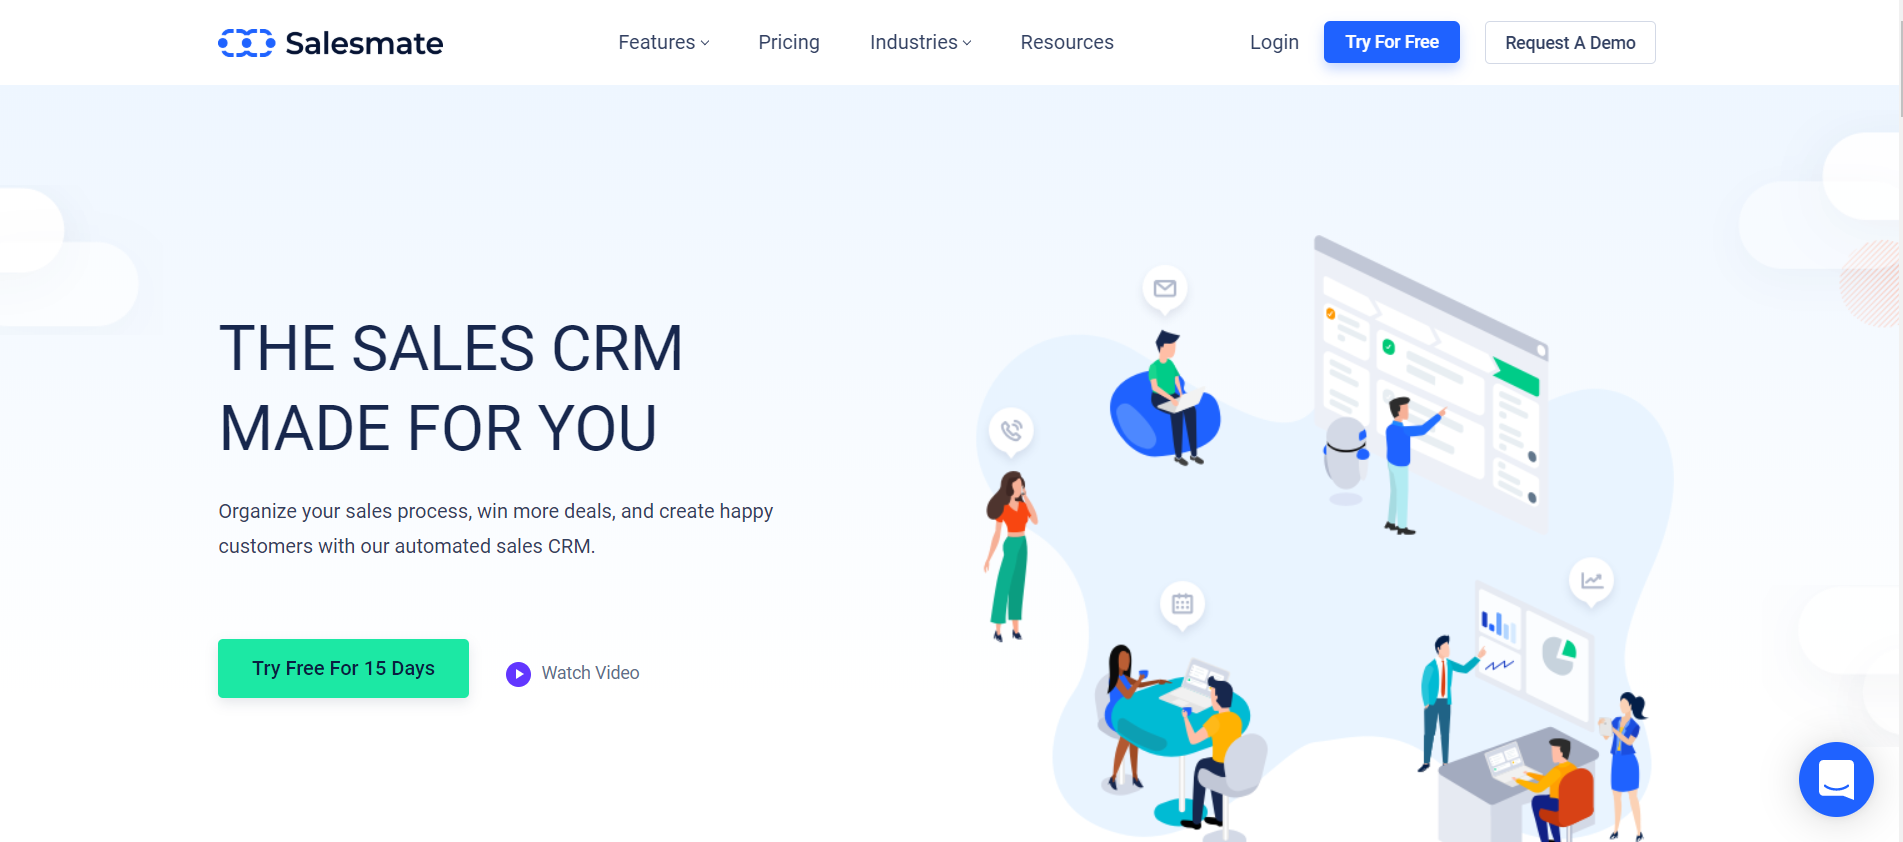 Salesmate as best crm tools for manager